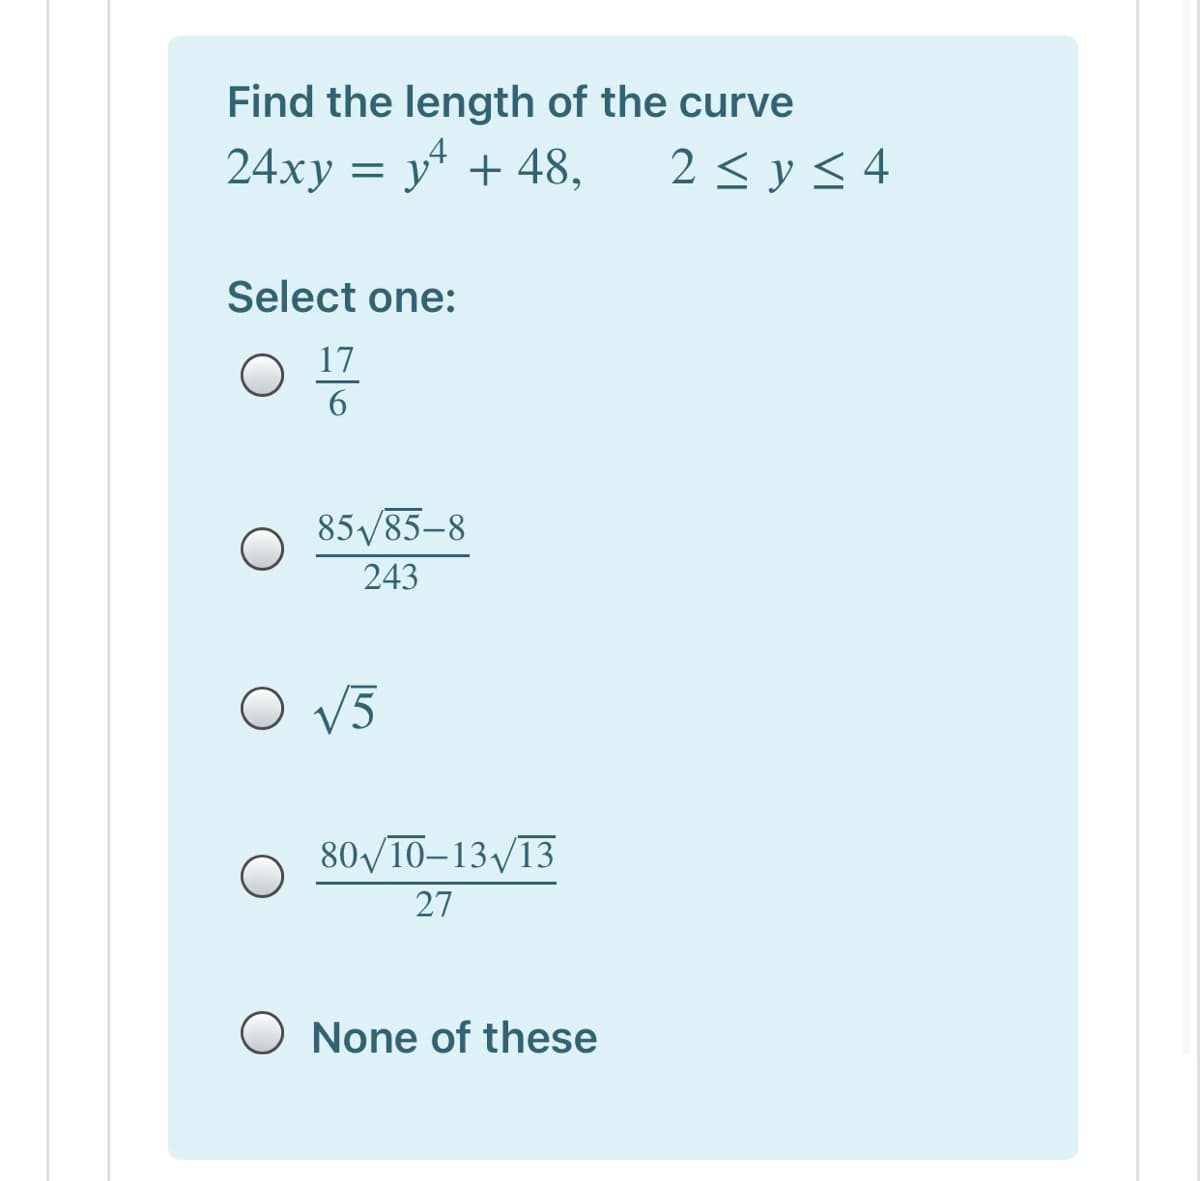 Find the length of the curve
24xy = y + 48,
2 < y < 4
Select one:
17
85/85-8
243
O V5
80/10–13 13
27
None of these
